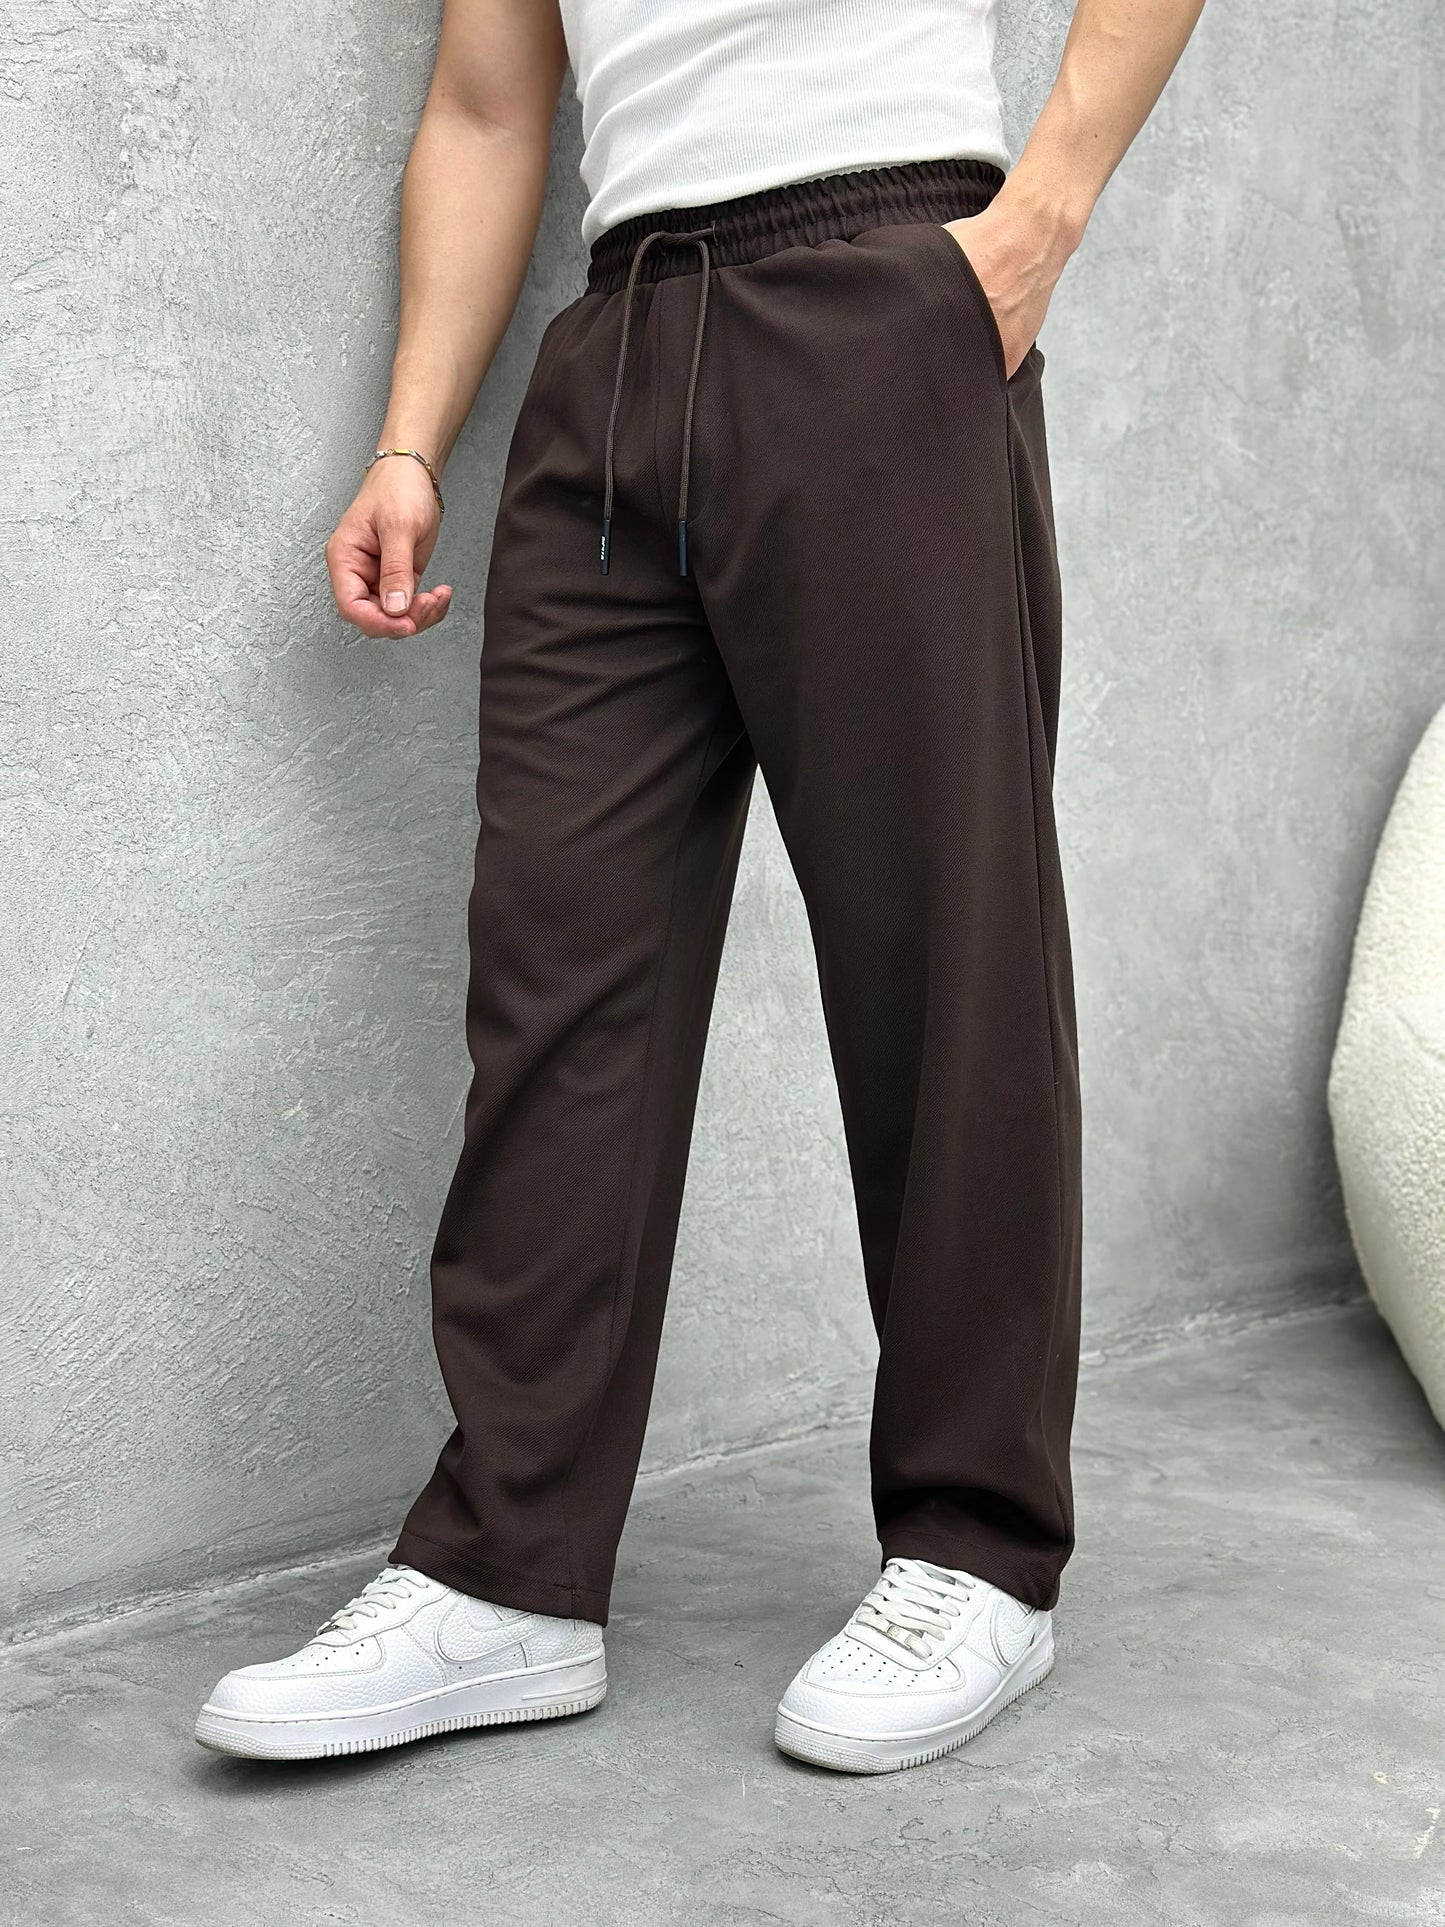 Comfortable Brown Lined Pants